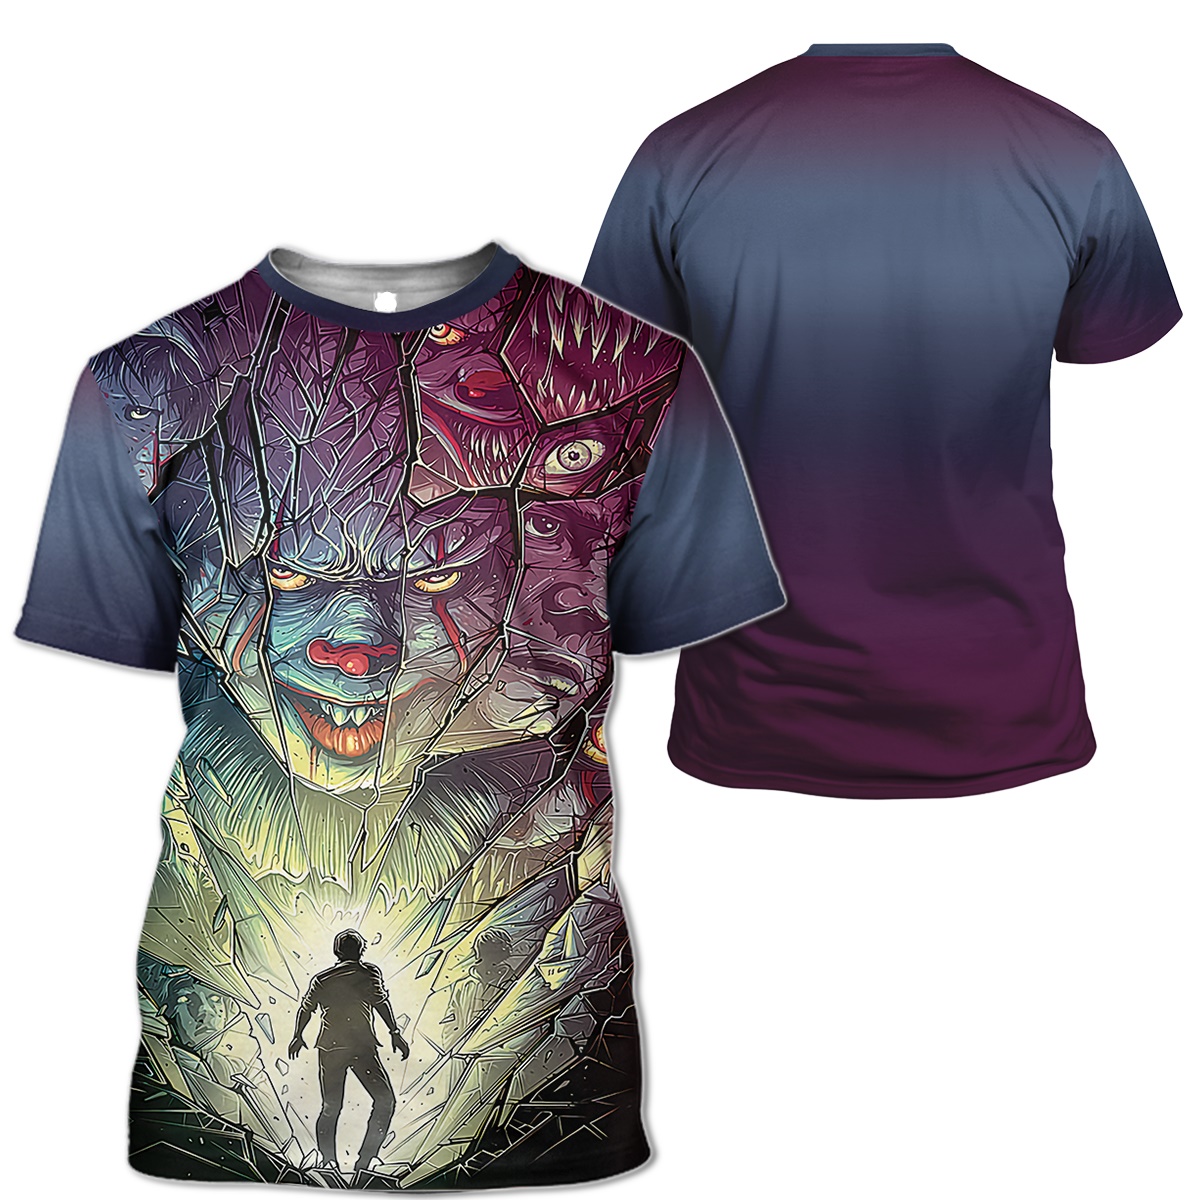 Pennywise Cracked Mirror chase Human 3D T SHIRT